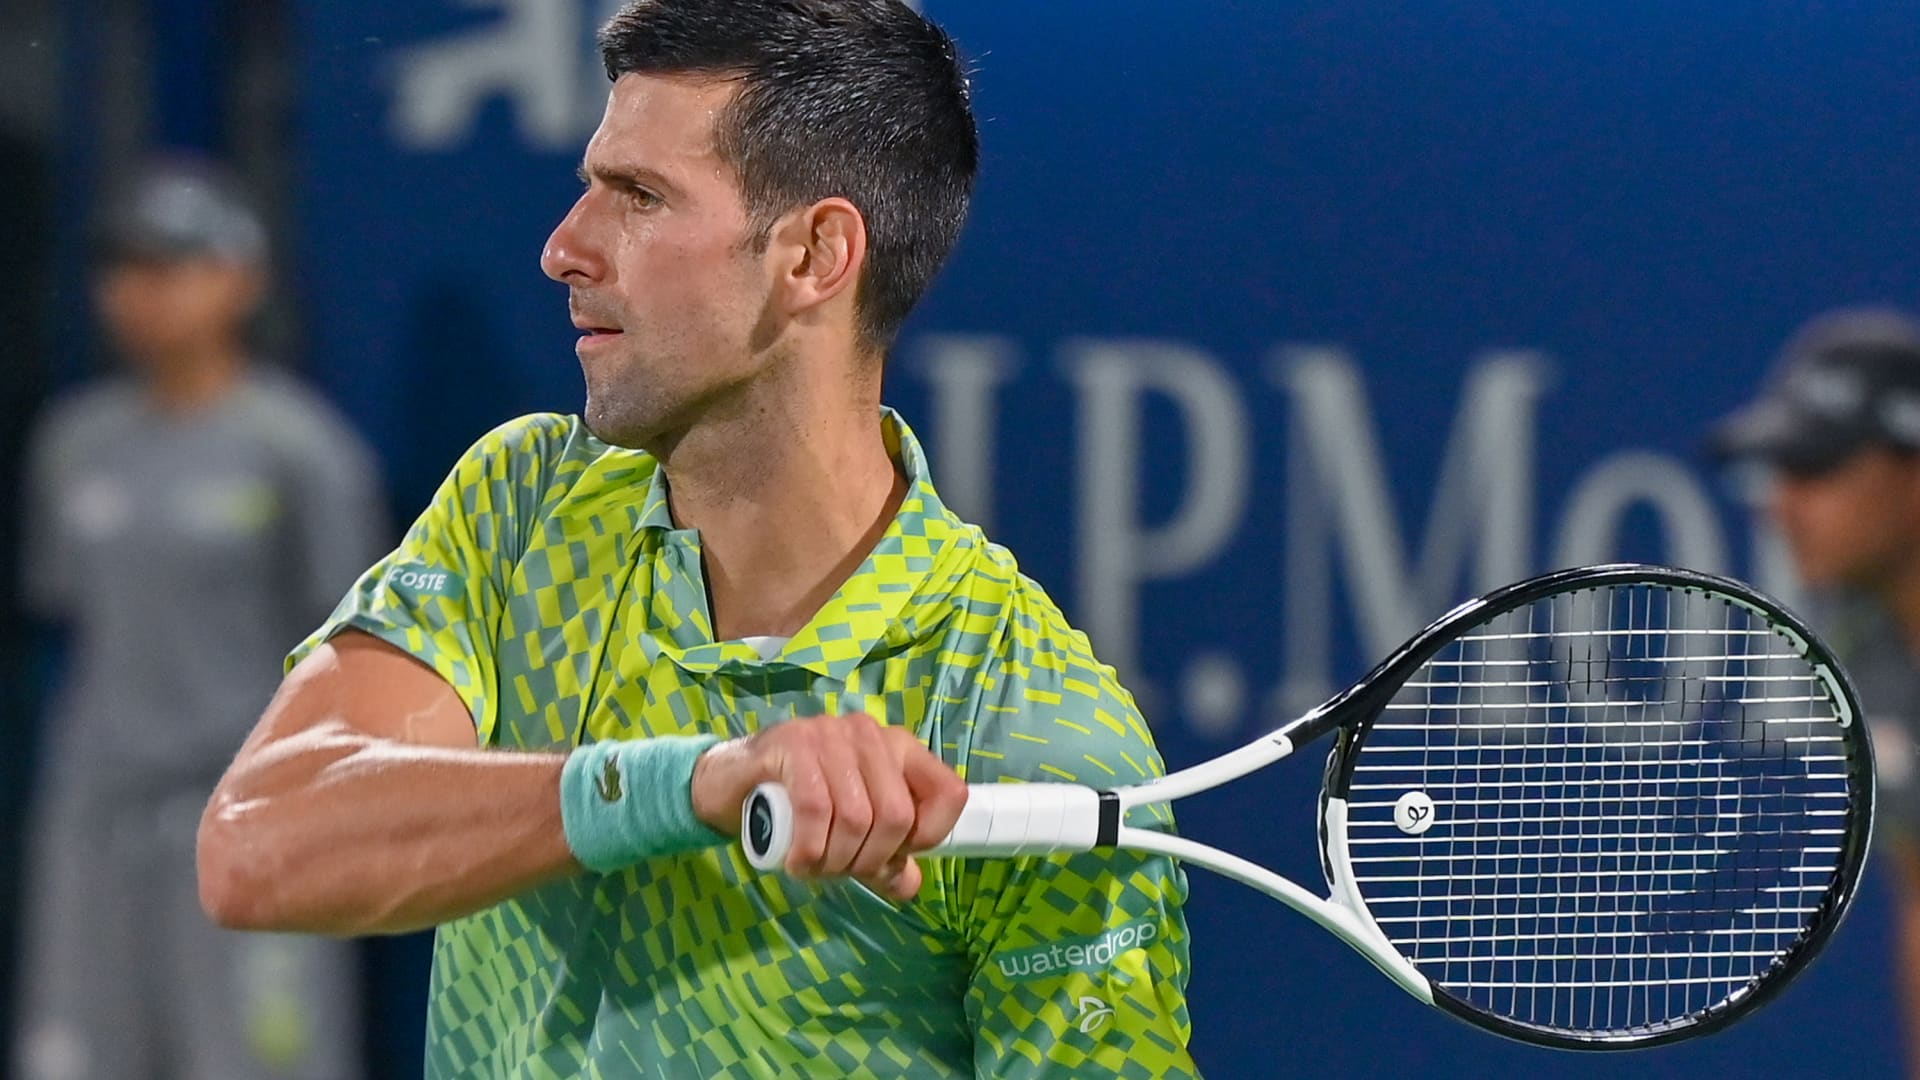 USTA, US Open hoping unvaccinated Novak Djokovic gets special nod to enter country